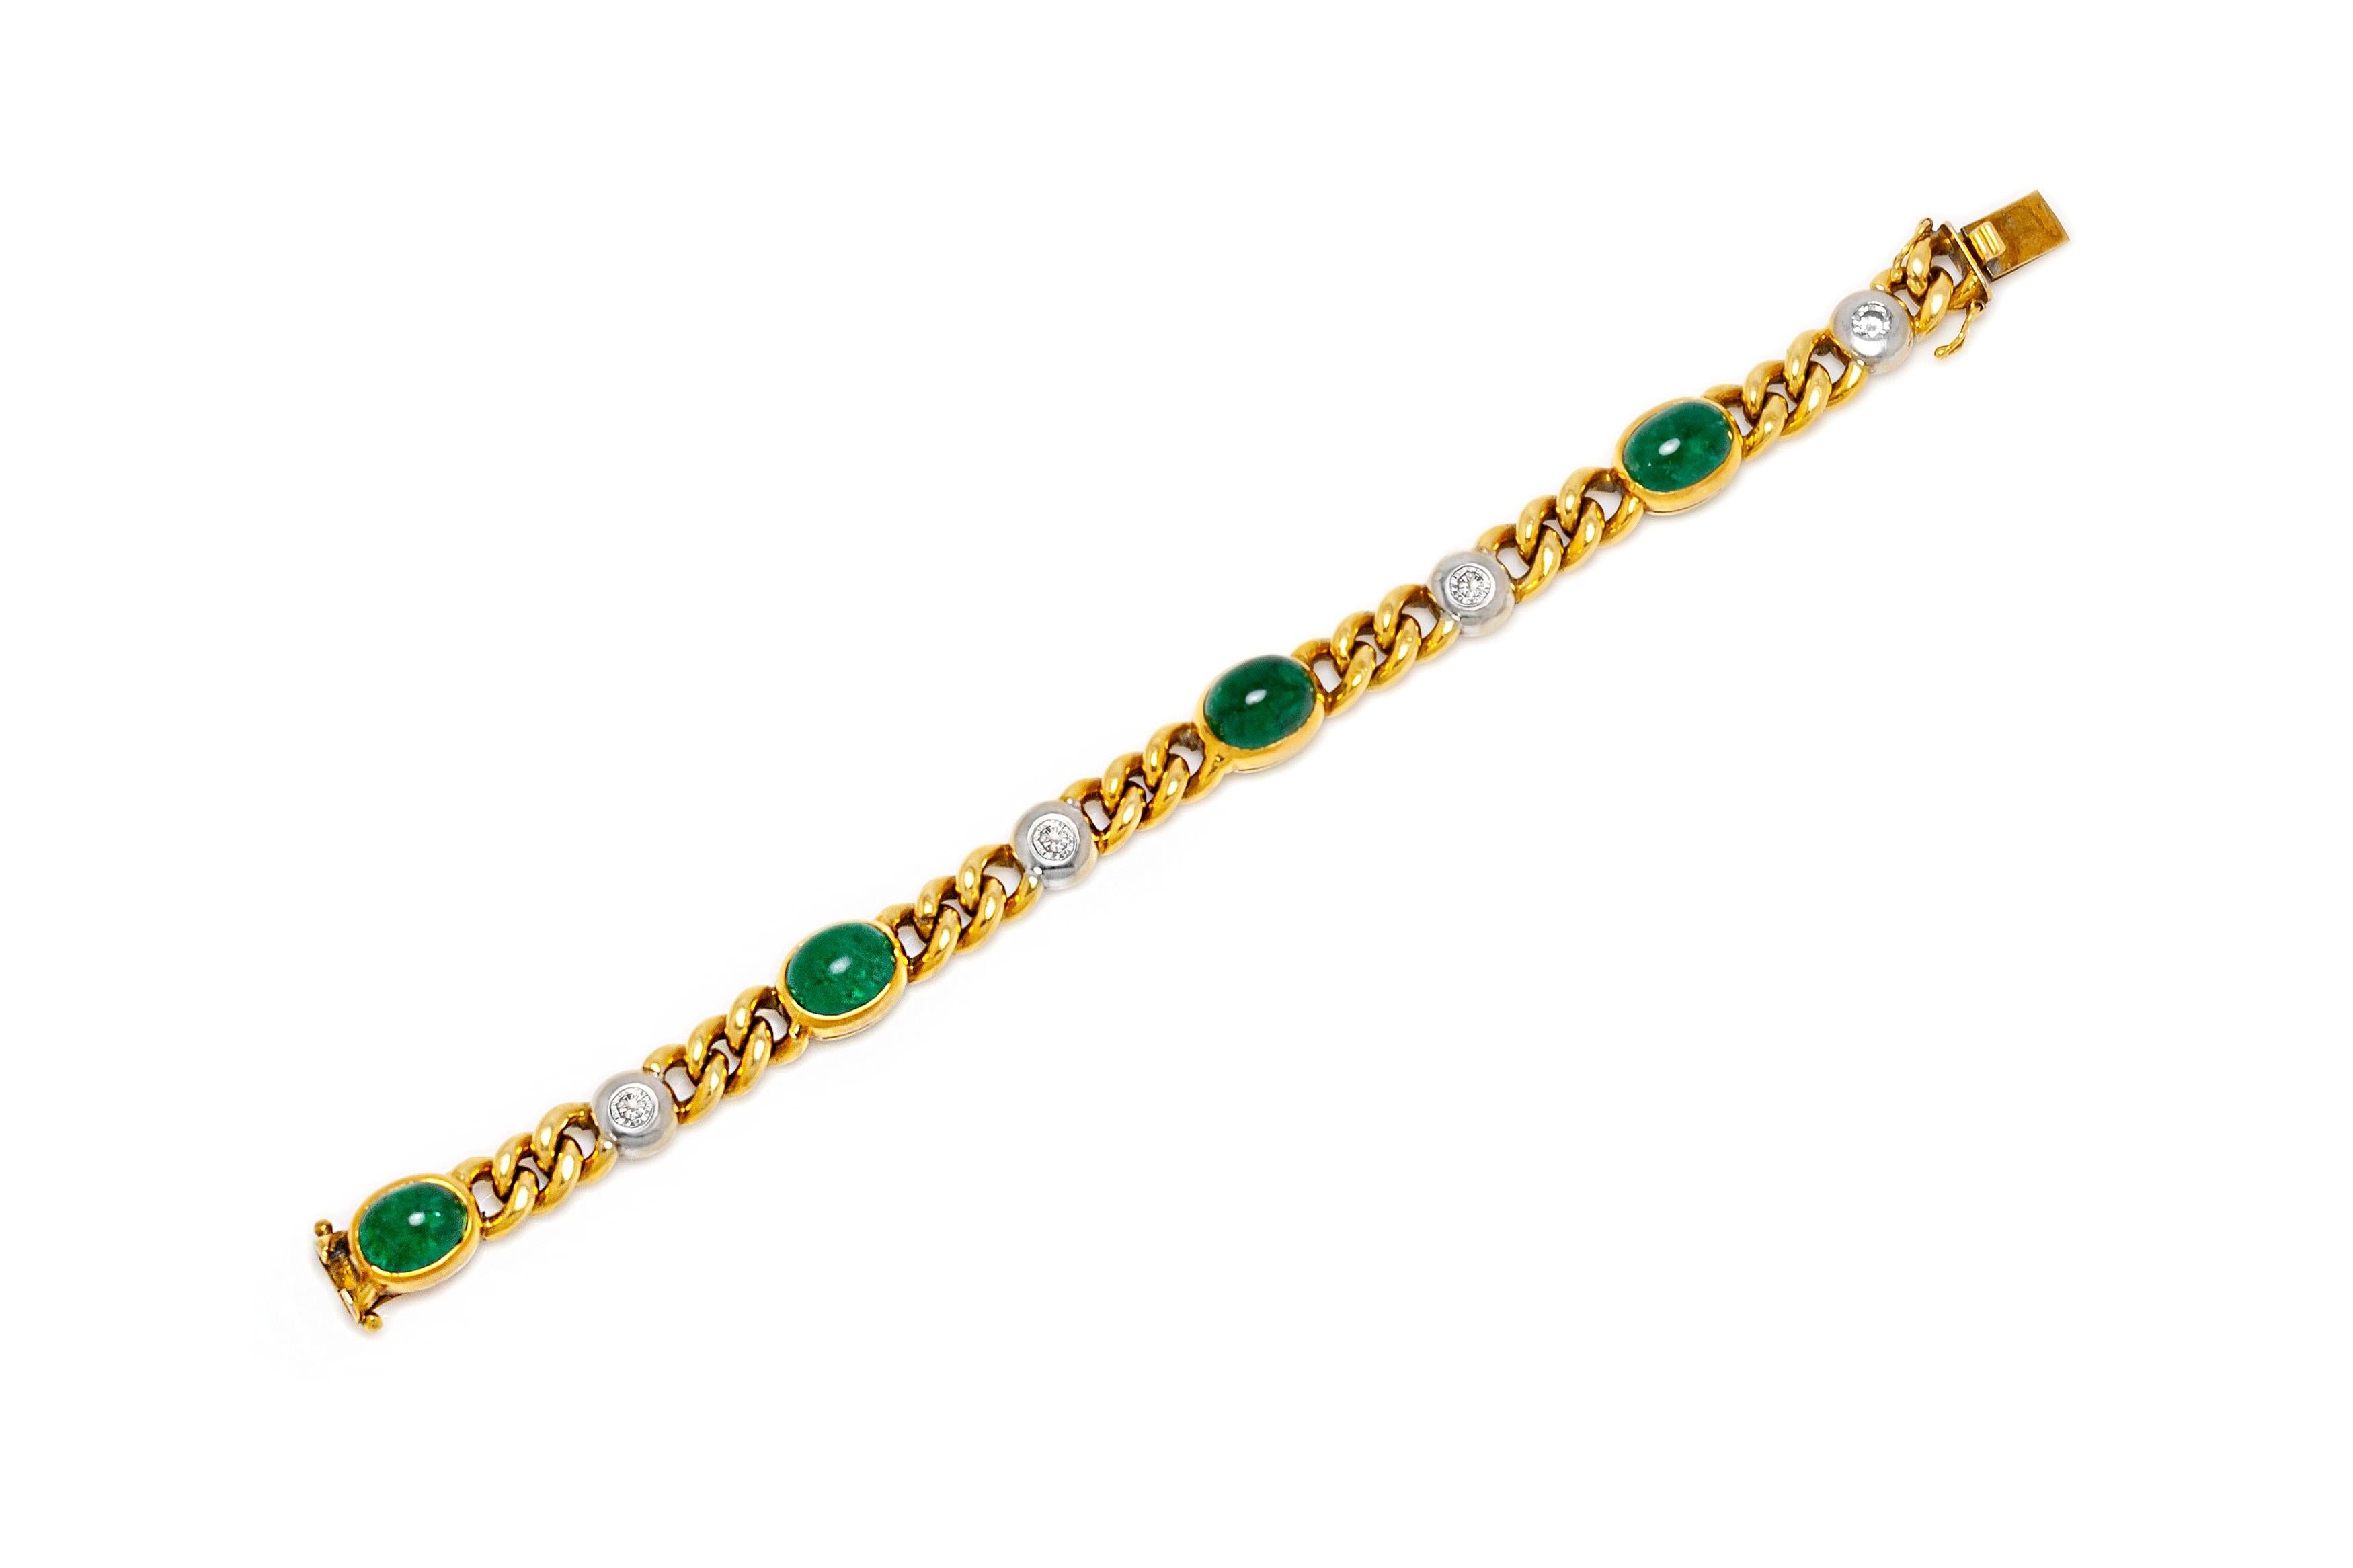 Bracelet finely crafted in 18k yellow gold with emeralds weighing a total of 15.80 carat and diamonds weighing a total of 1.00 carat. Length of the bracelet is 7 inch/18.5 cm. Circa 1960's.